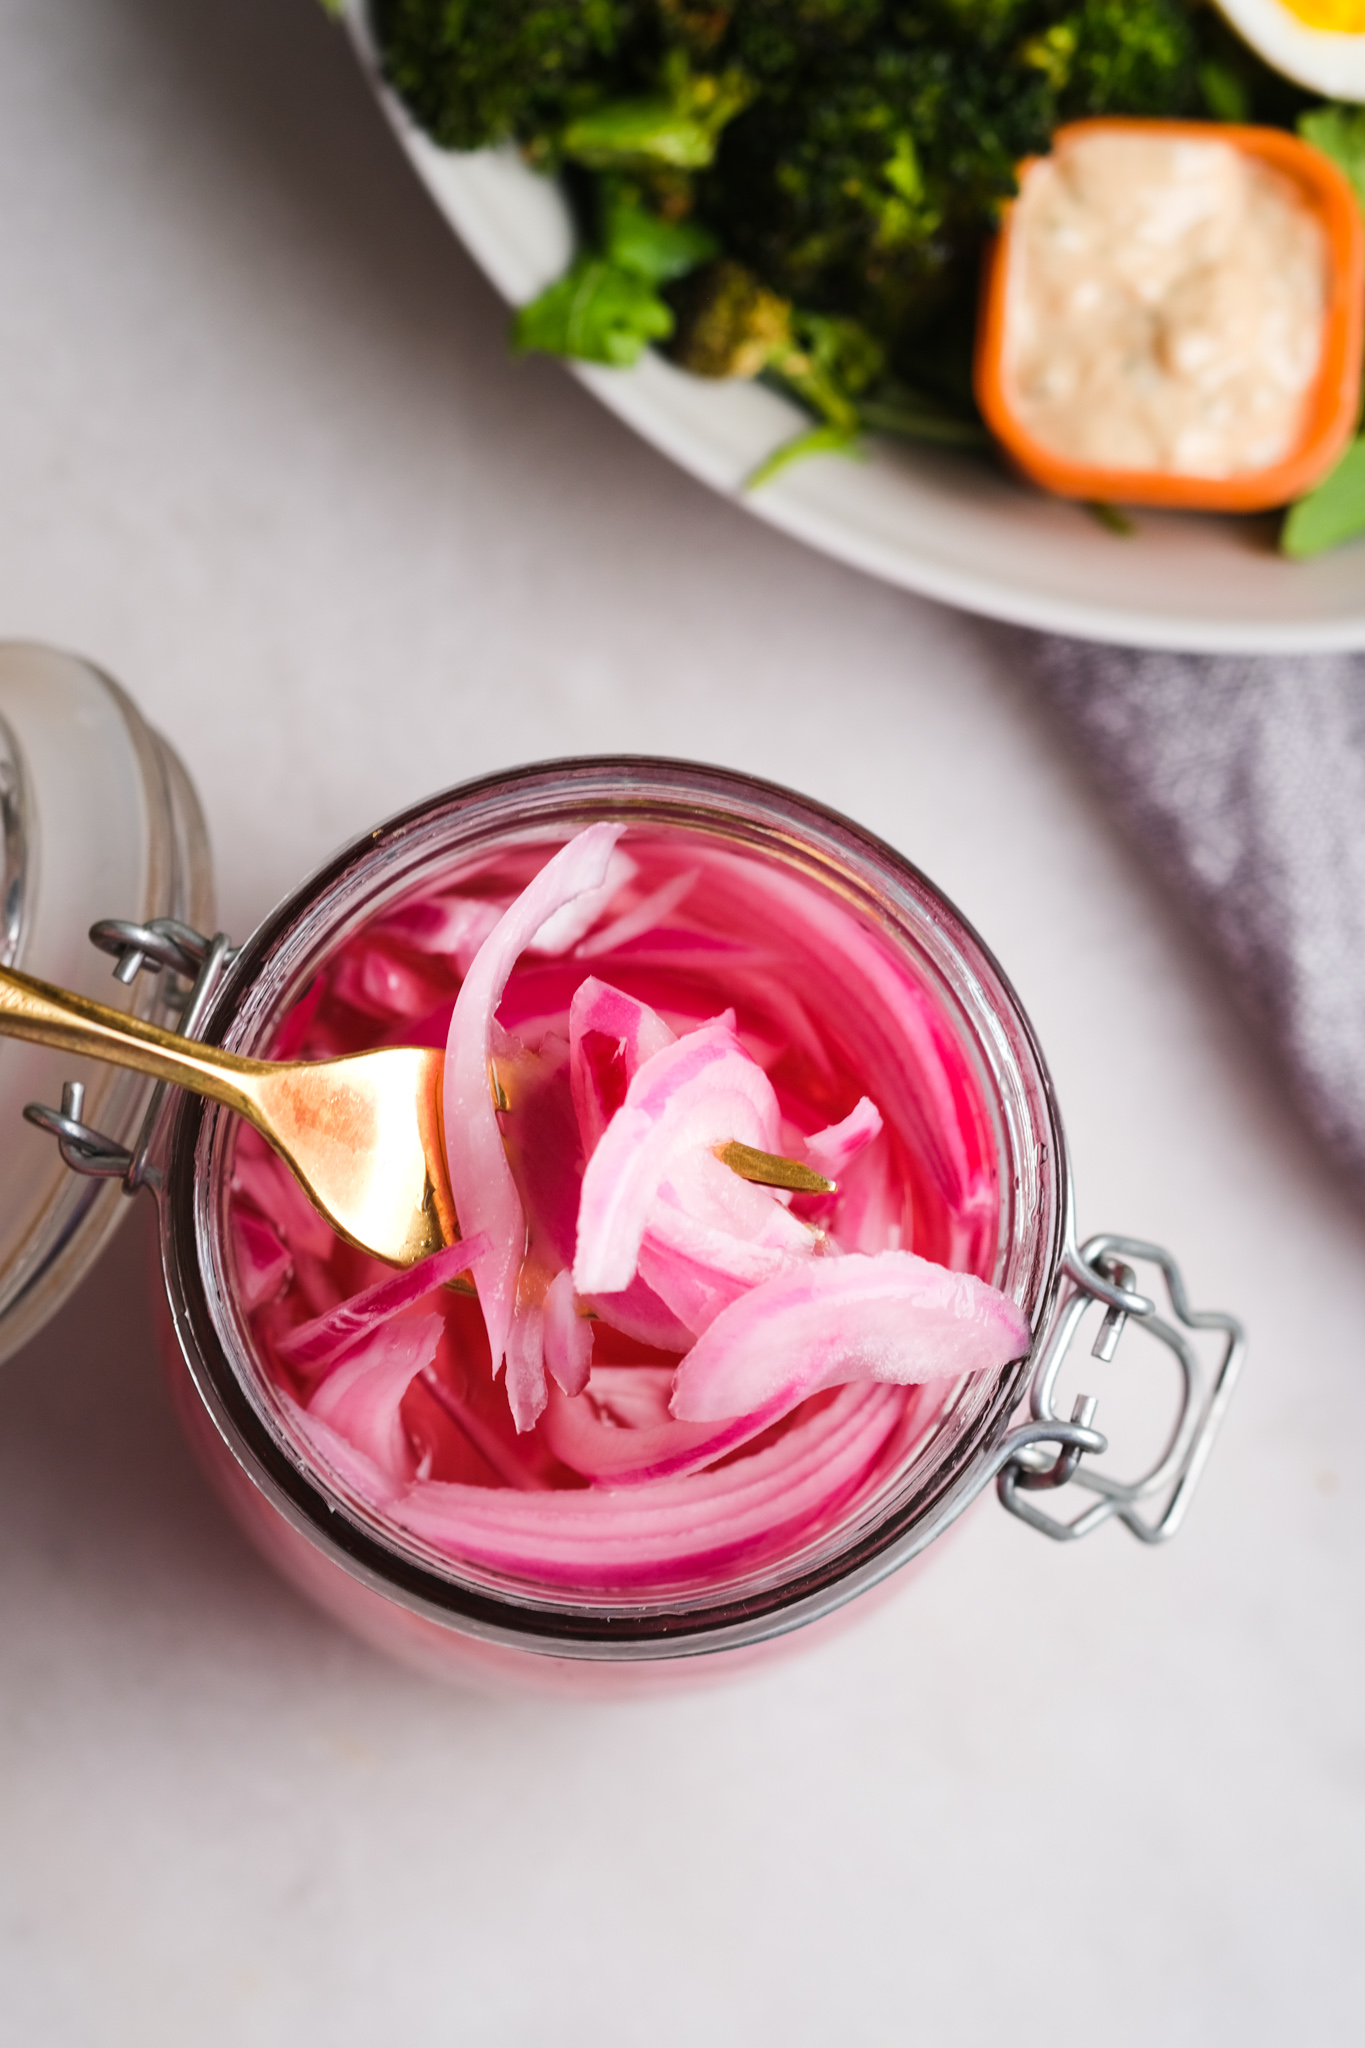 picking out pickled red onions from a jar